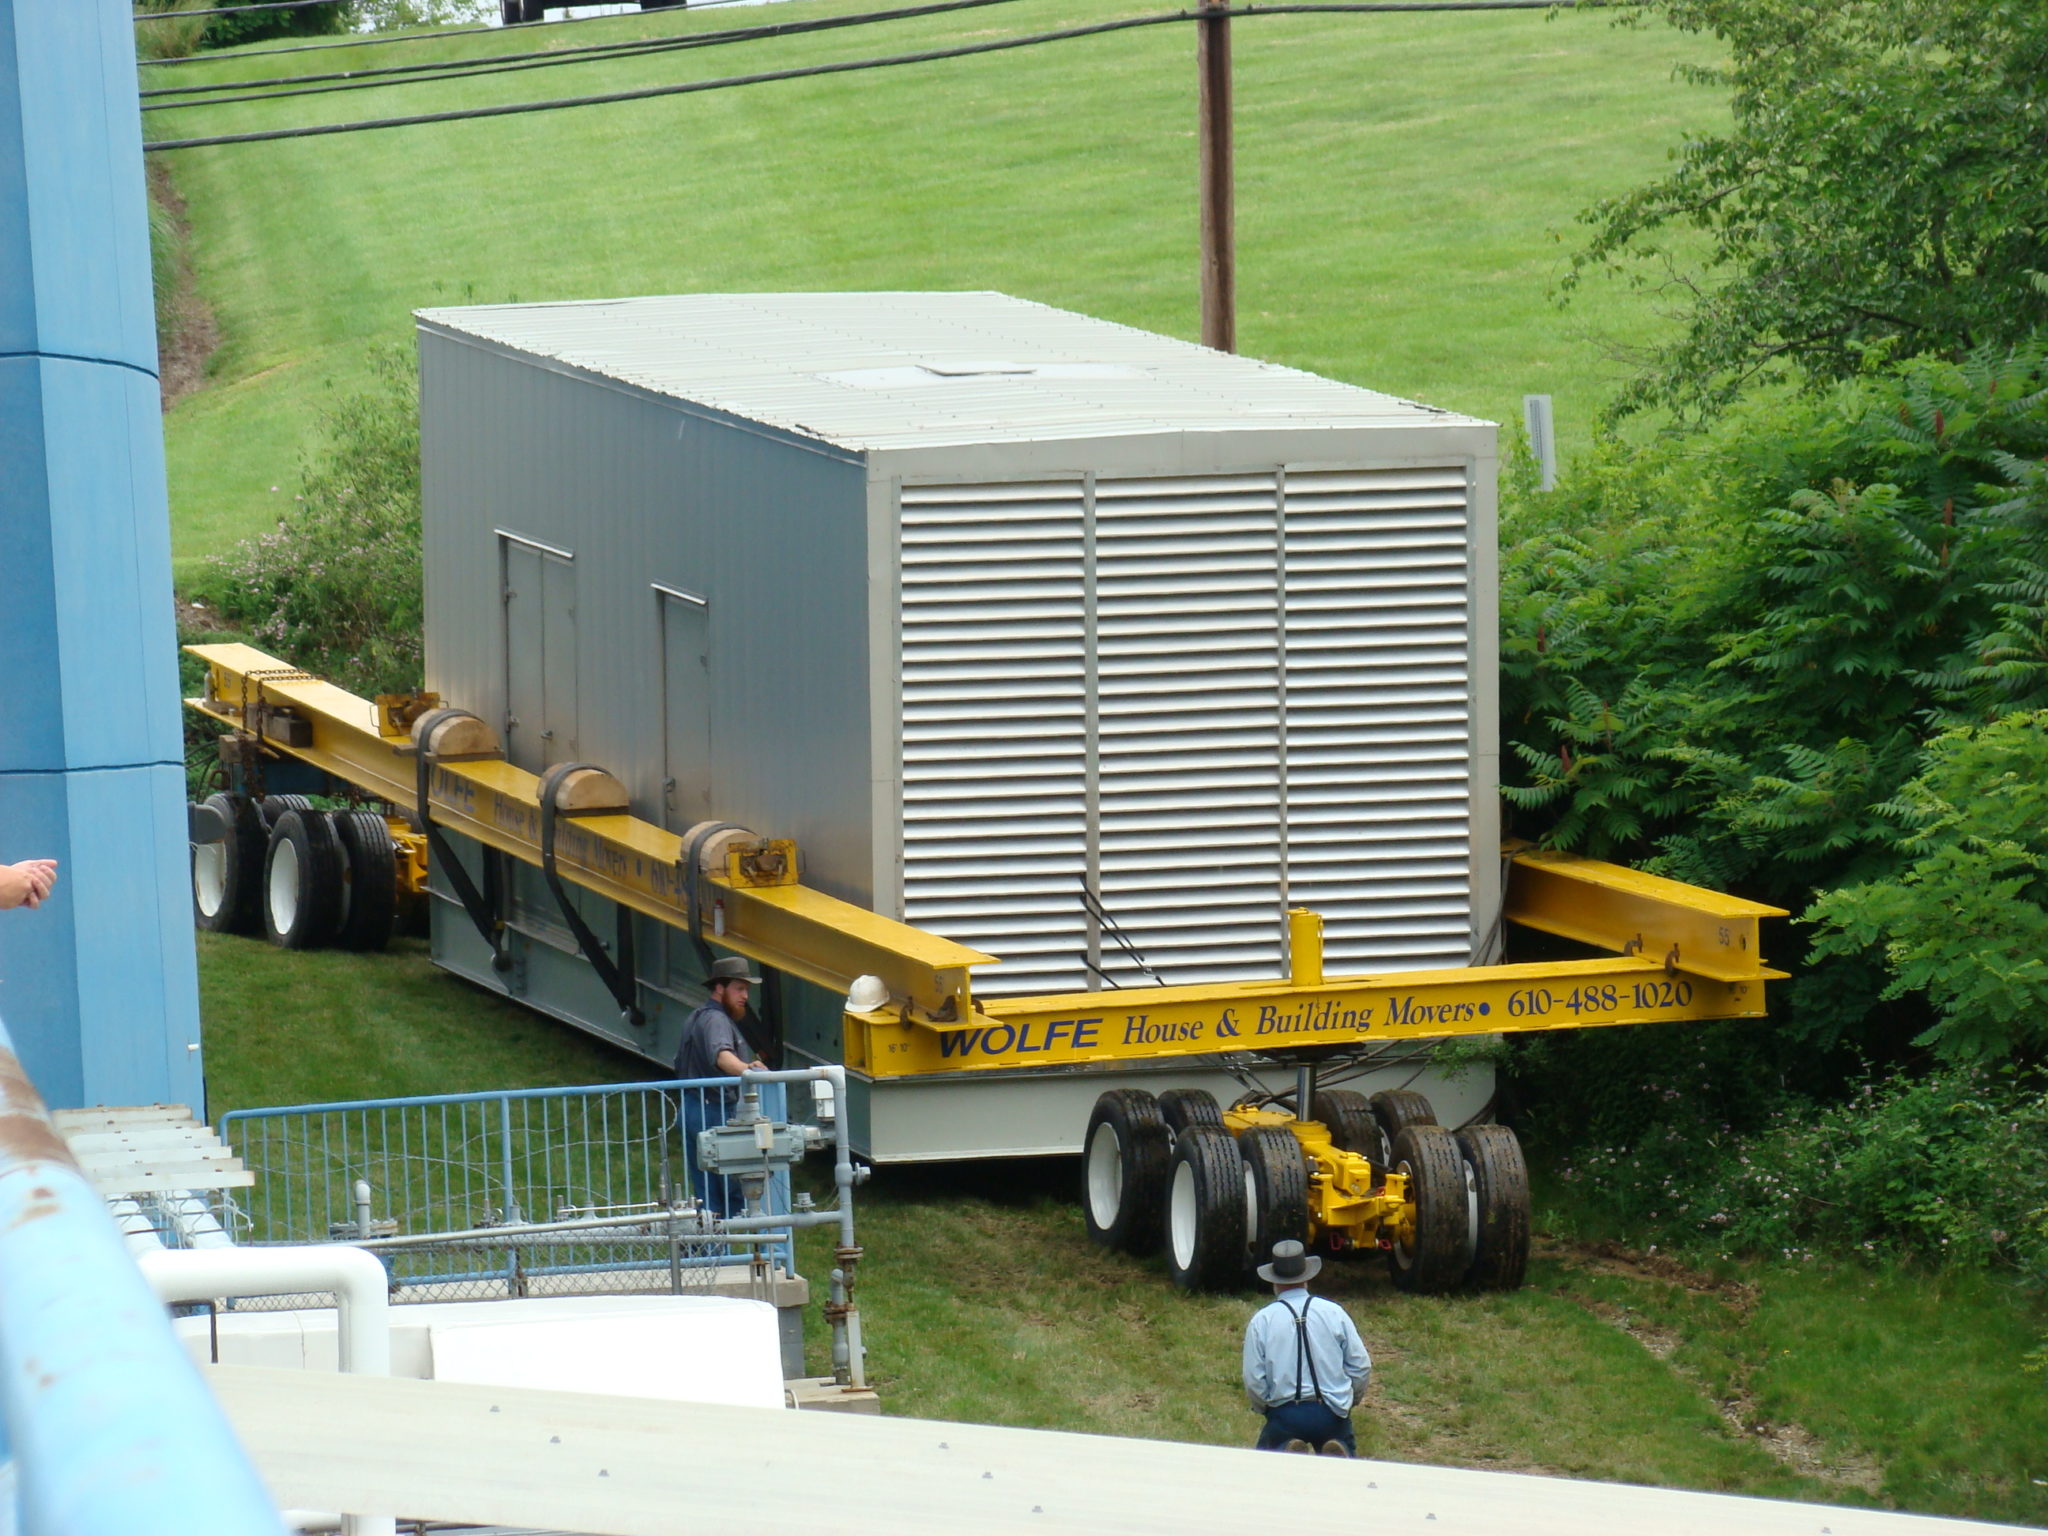 Large generator lifted by dolly moving in grass.